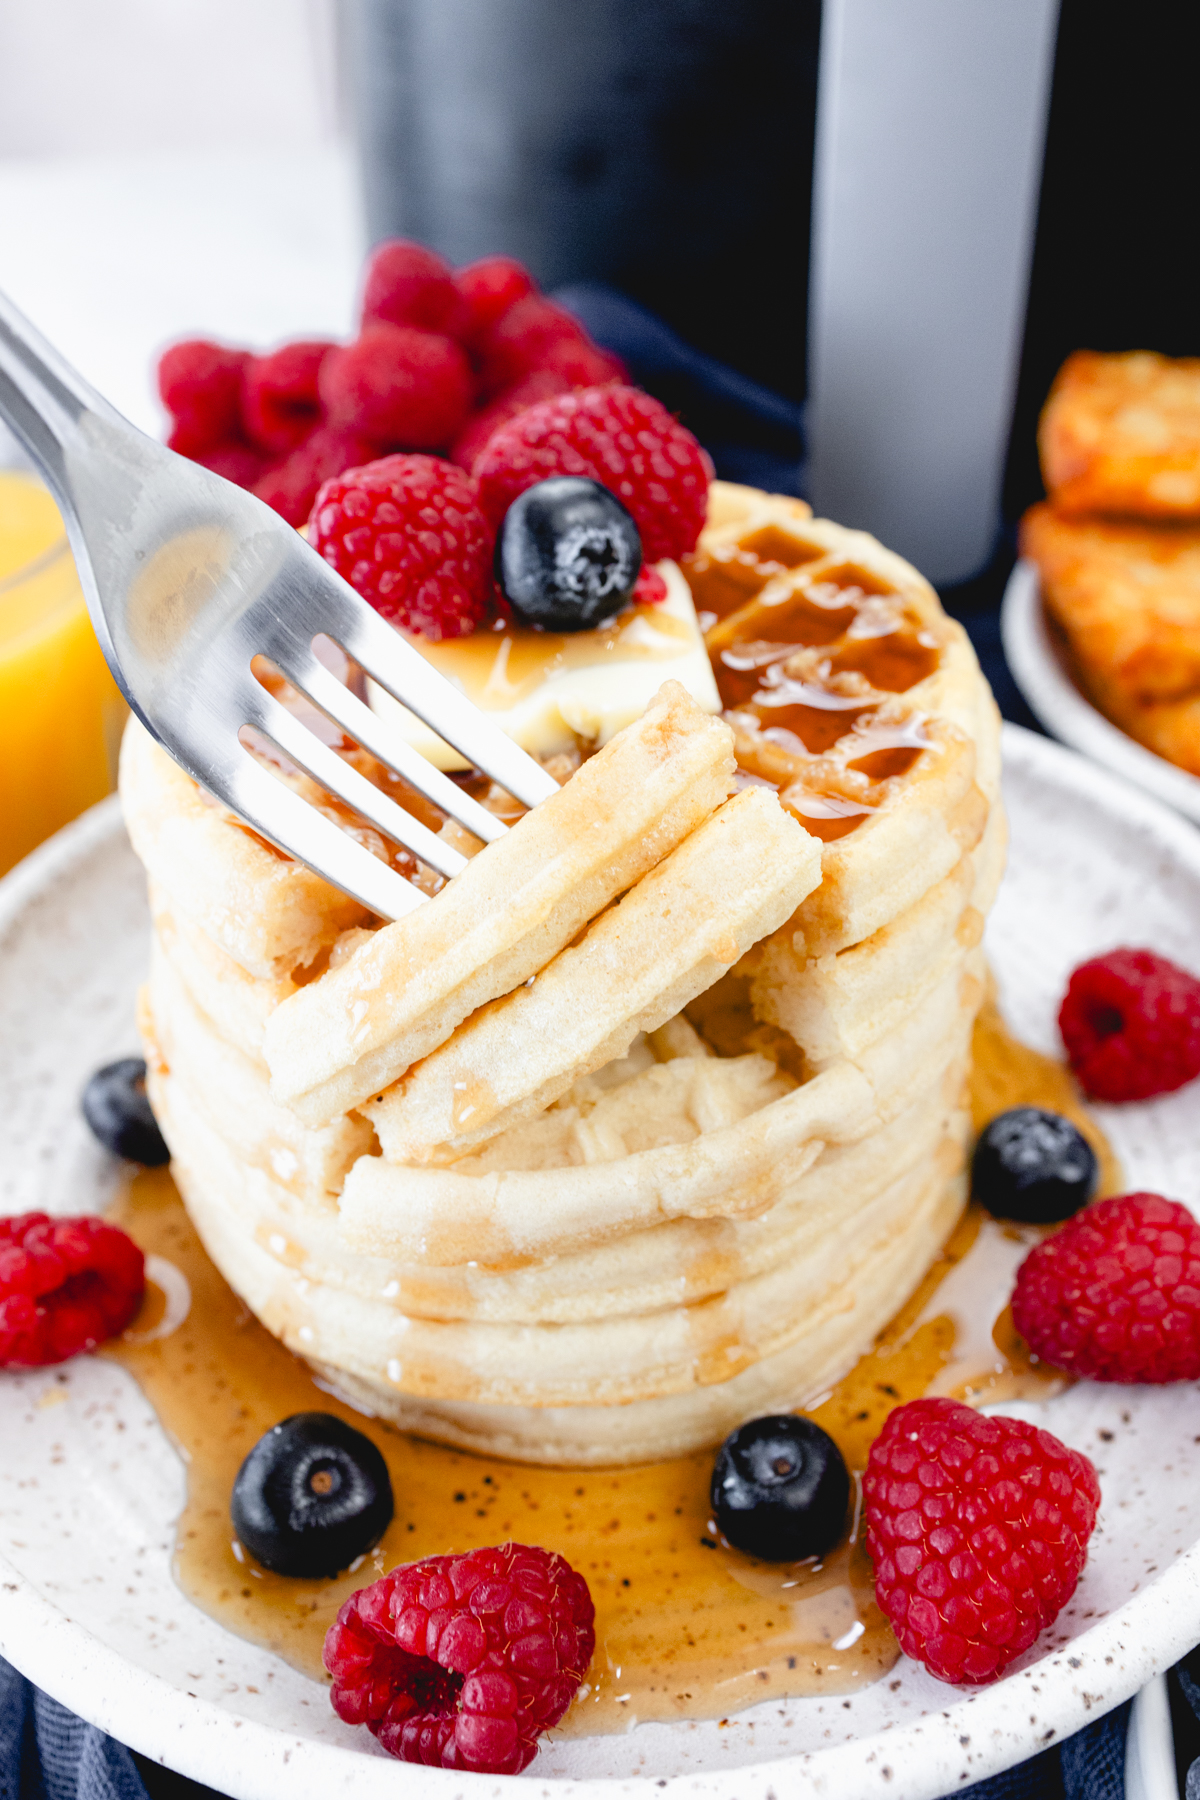 Close up view of a stack of waffles on a plate, topped with syrup, butter, and berries. A fork is in the foreground with skewered pieces of waffle on it. Behind the plate is an air fryer, a bowl of berries, a glass of orange juice, and a plate of hash browns.